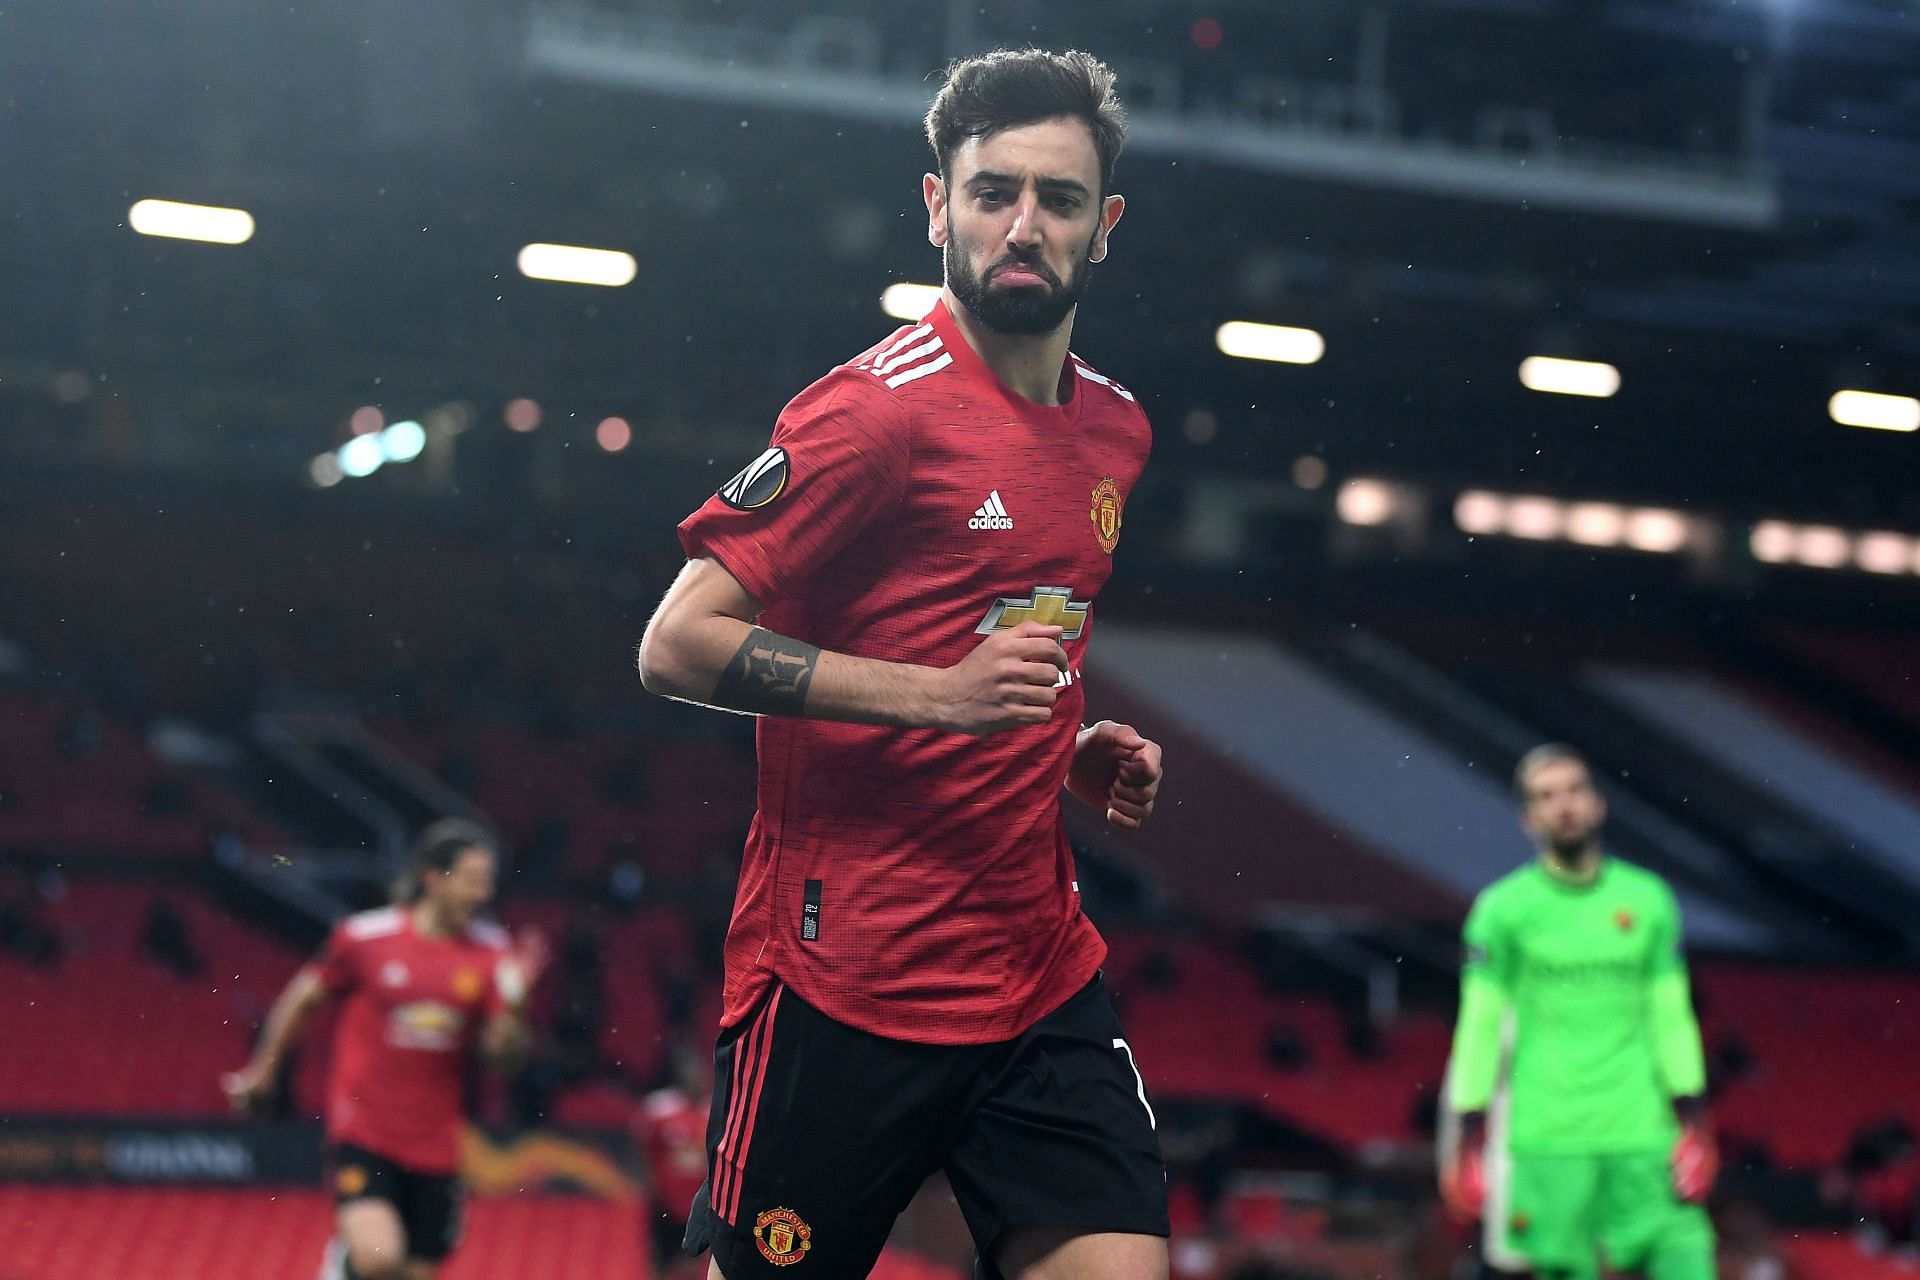 Bruno Fernandes has revived Manchester United from the depths of mid-table mediocrity